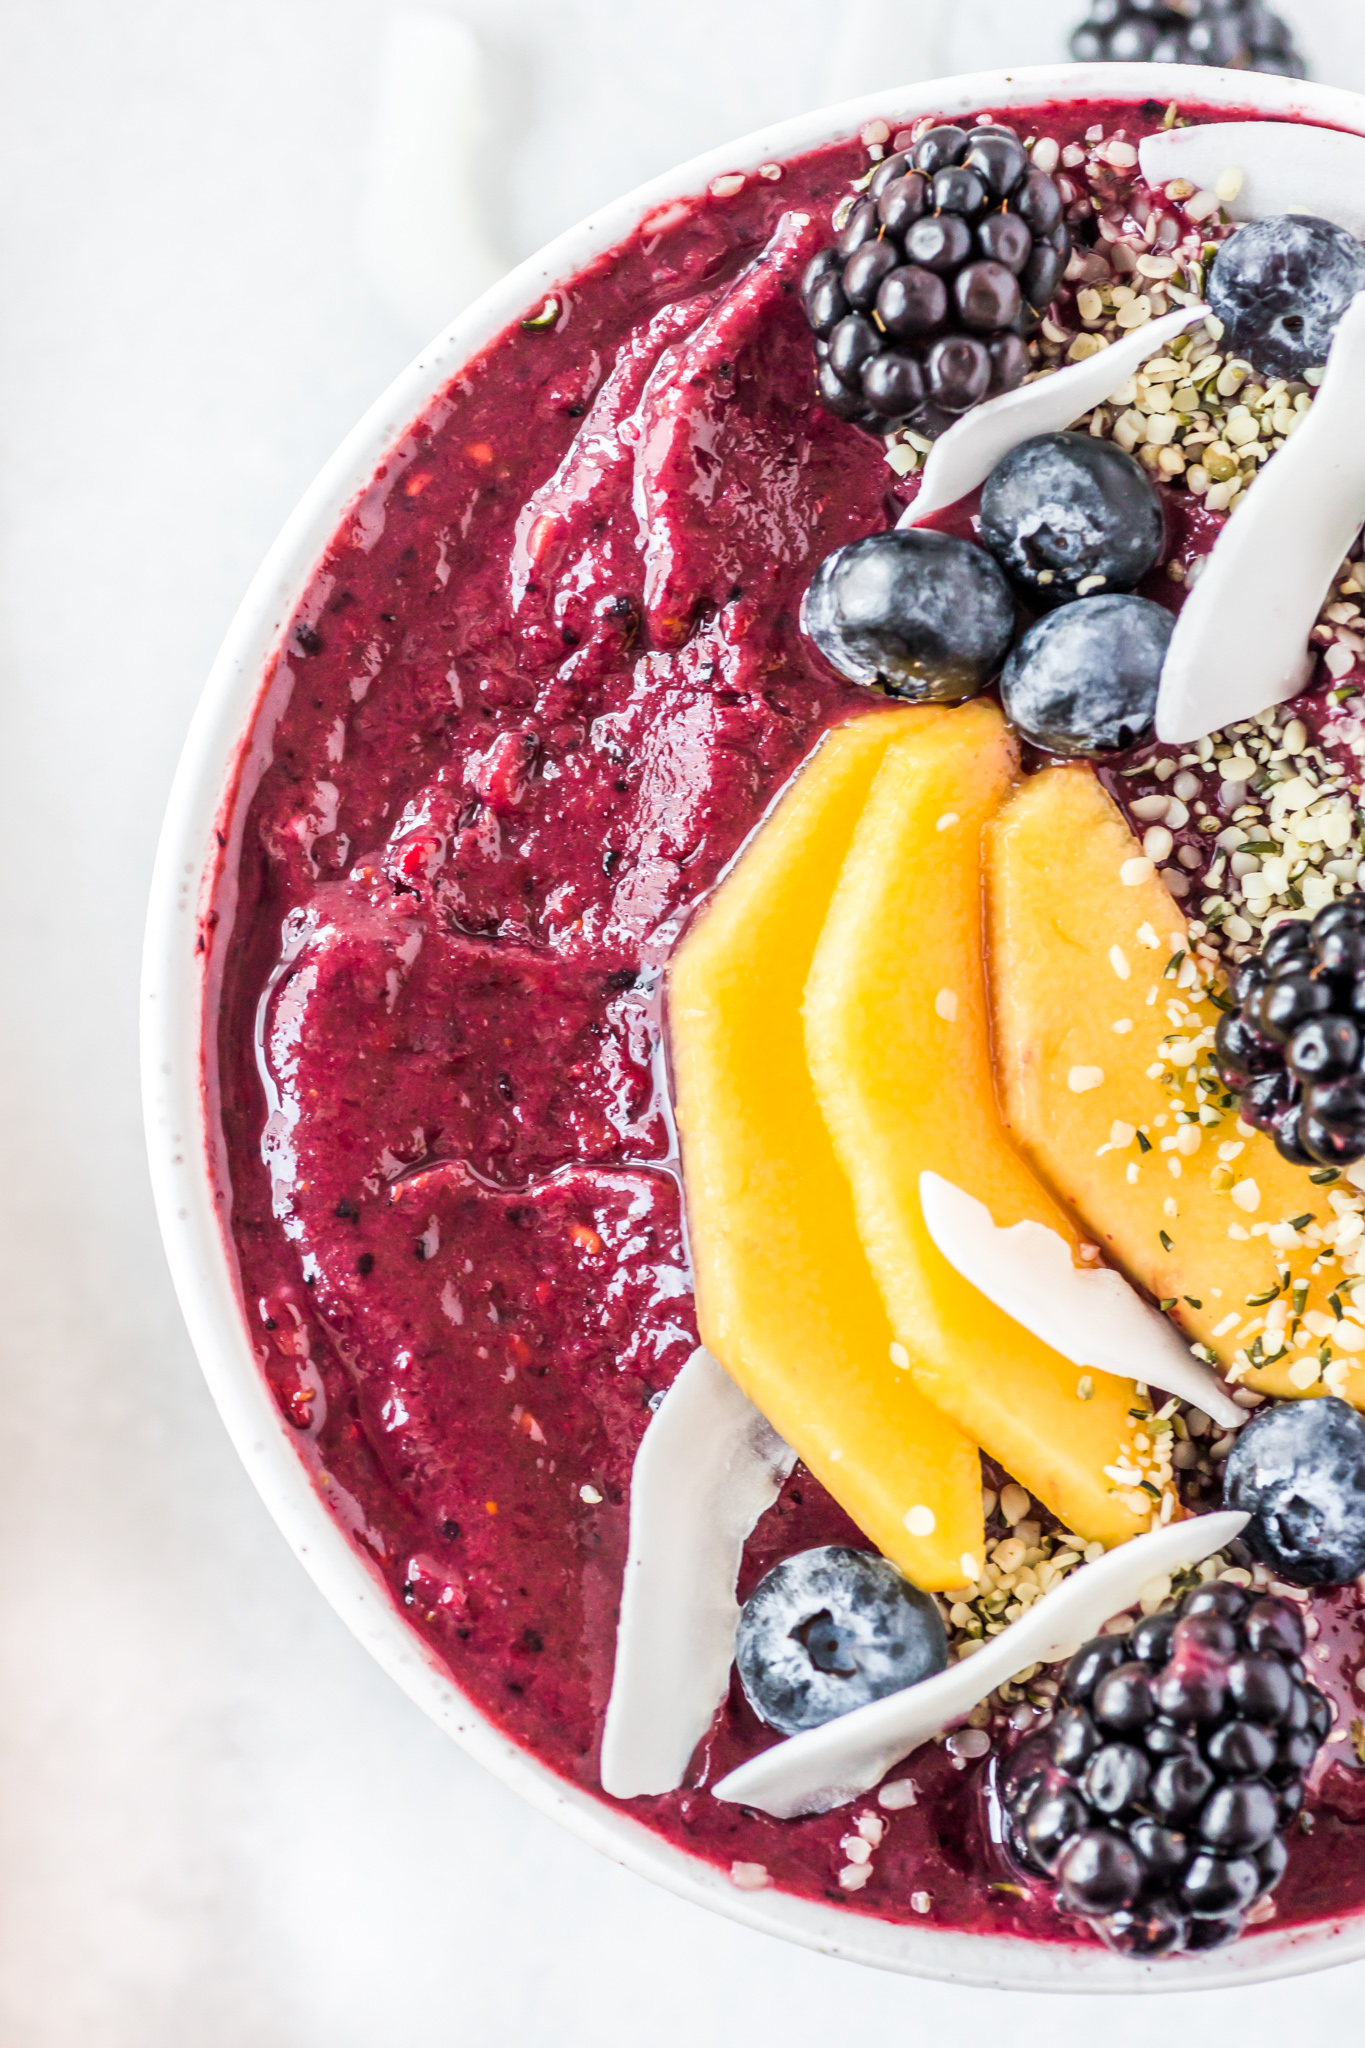 Acai Smoothie Bowls for Delicious and Easy Meal Prep Breakfasts!